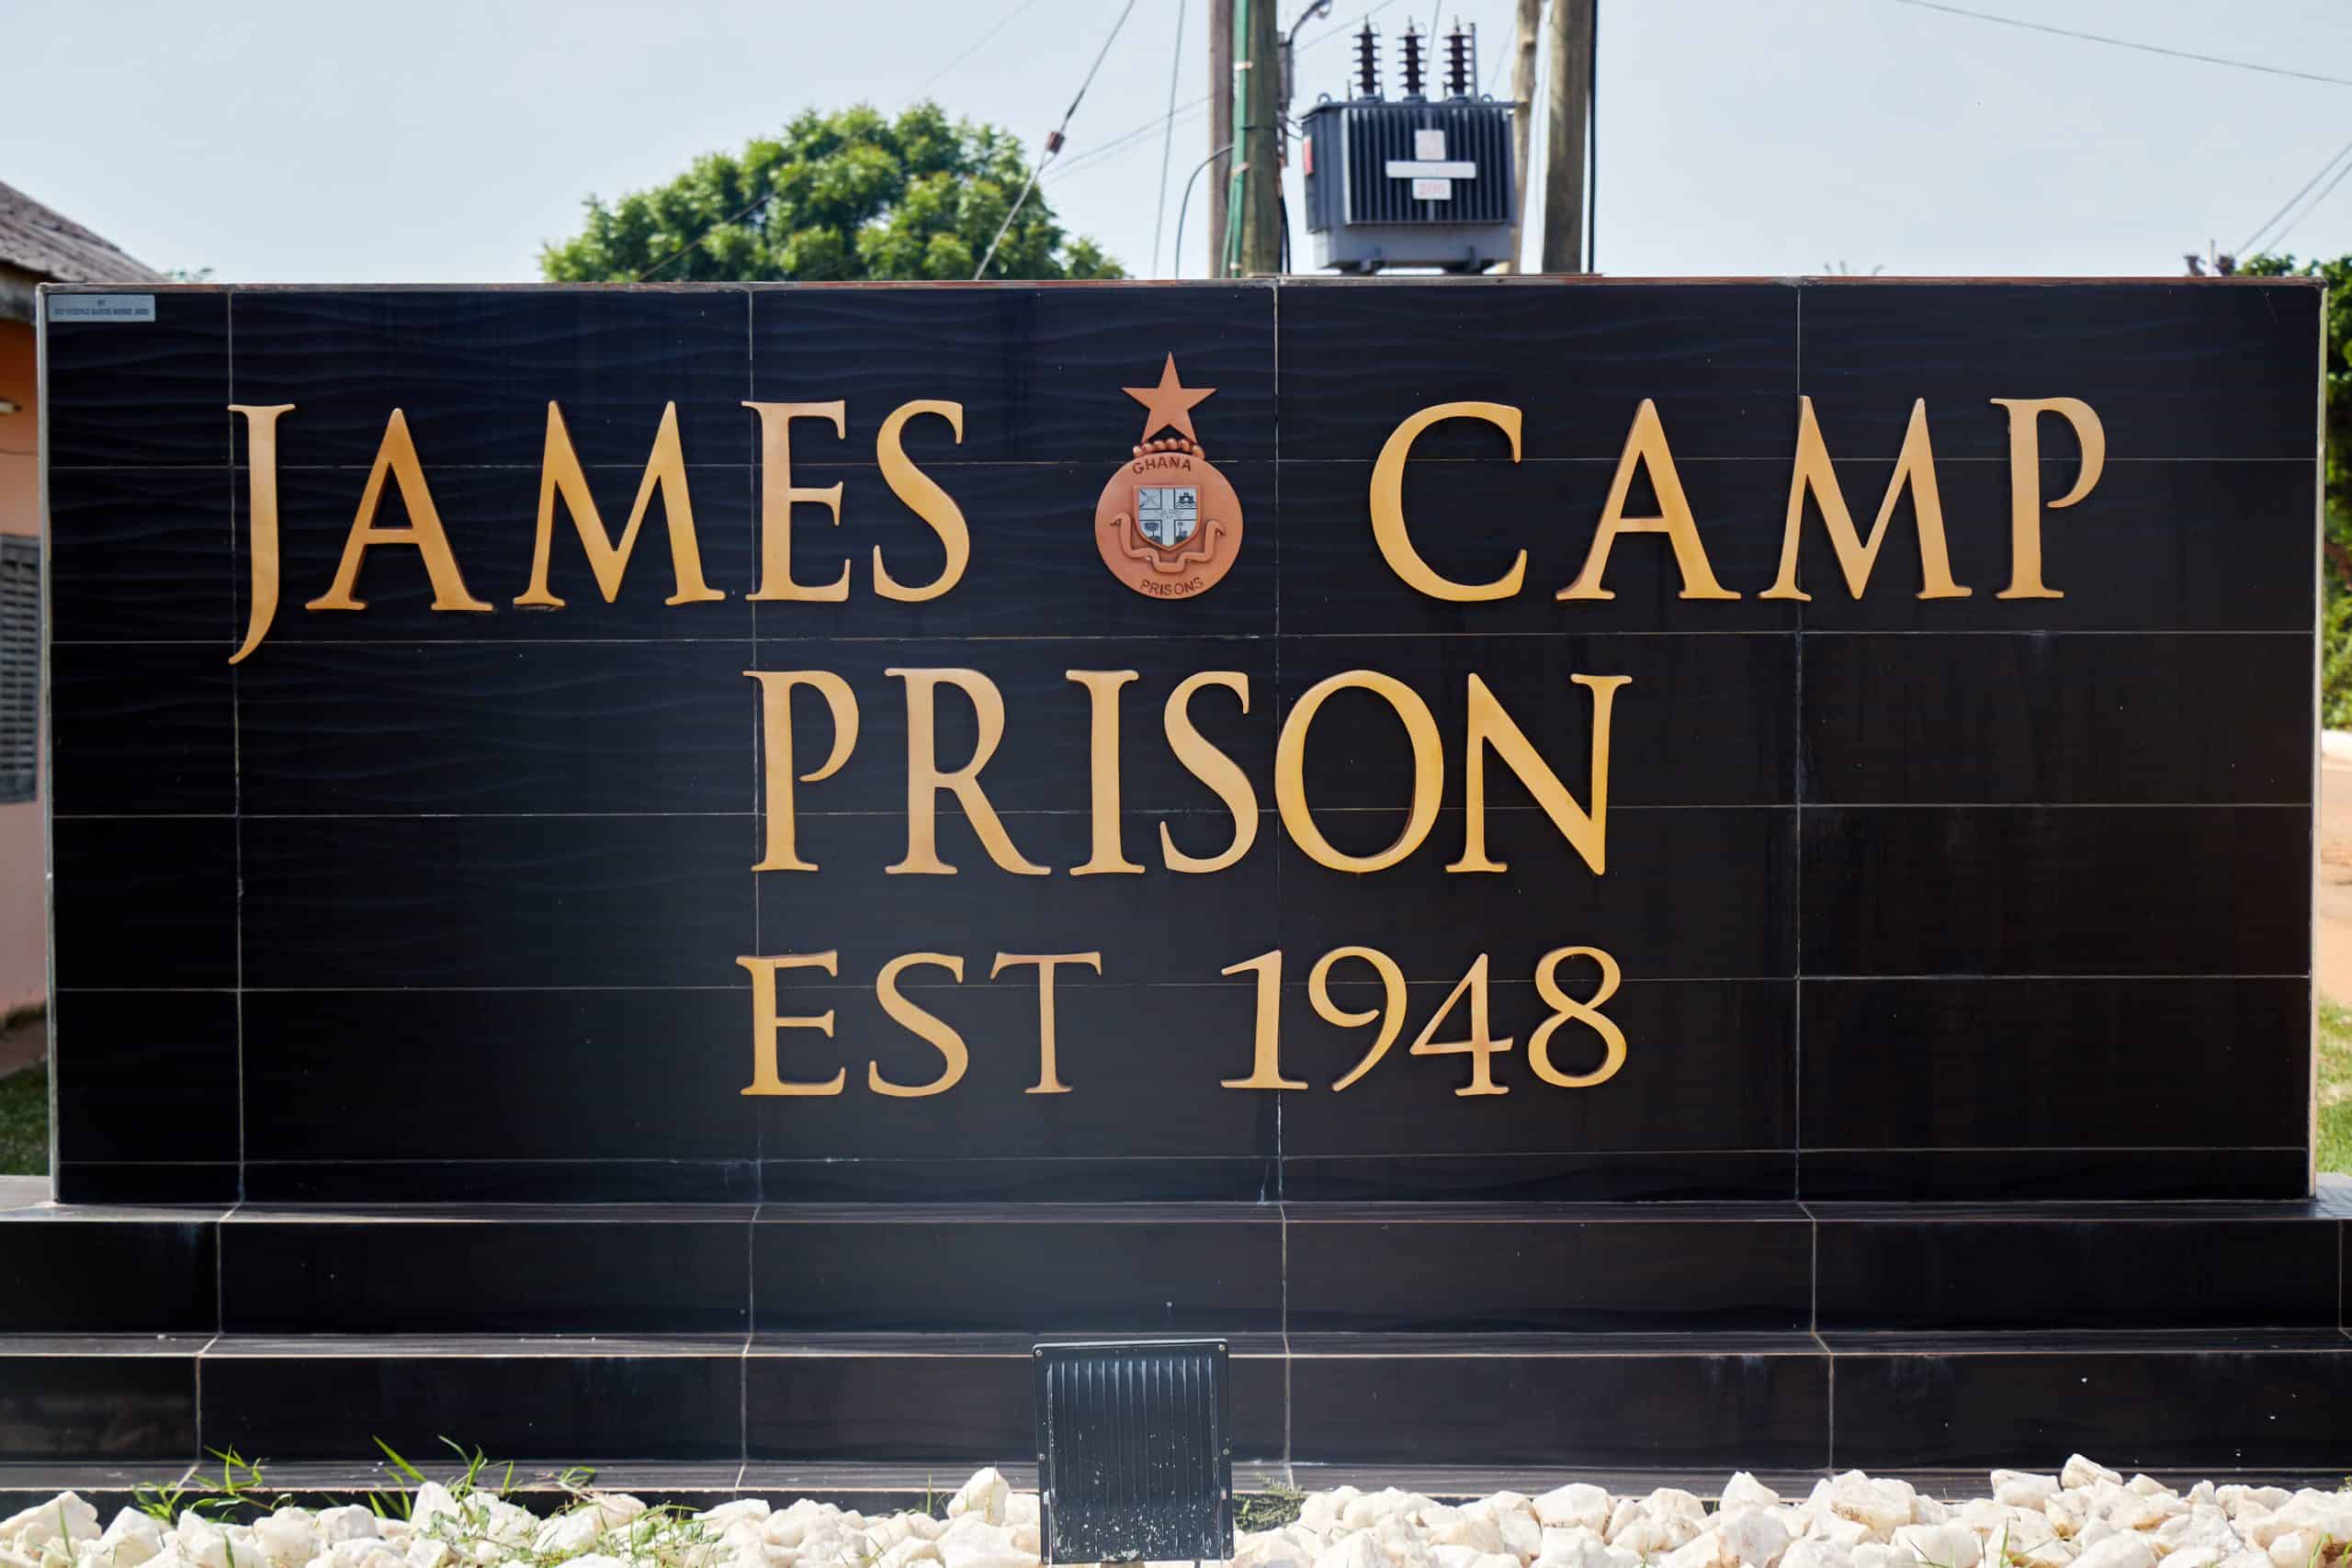 Mother of all Nations provides James Camp Prisons Inmates with Hot meals during Ramadan